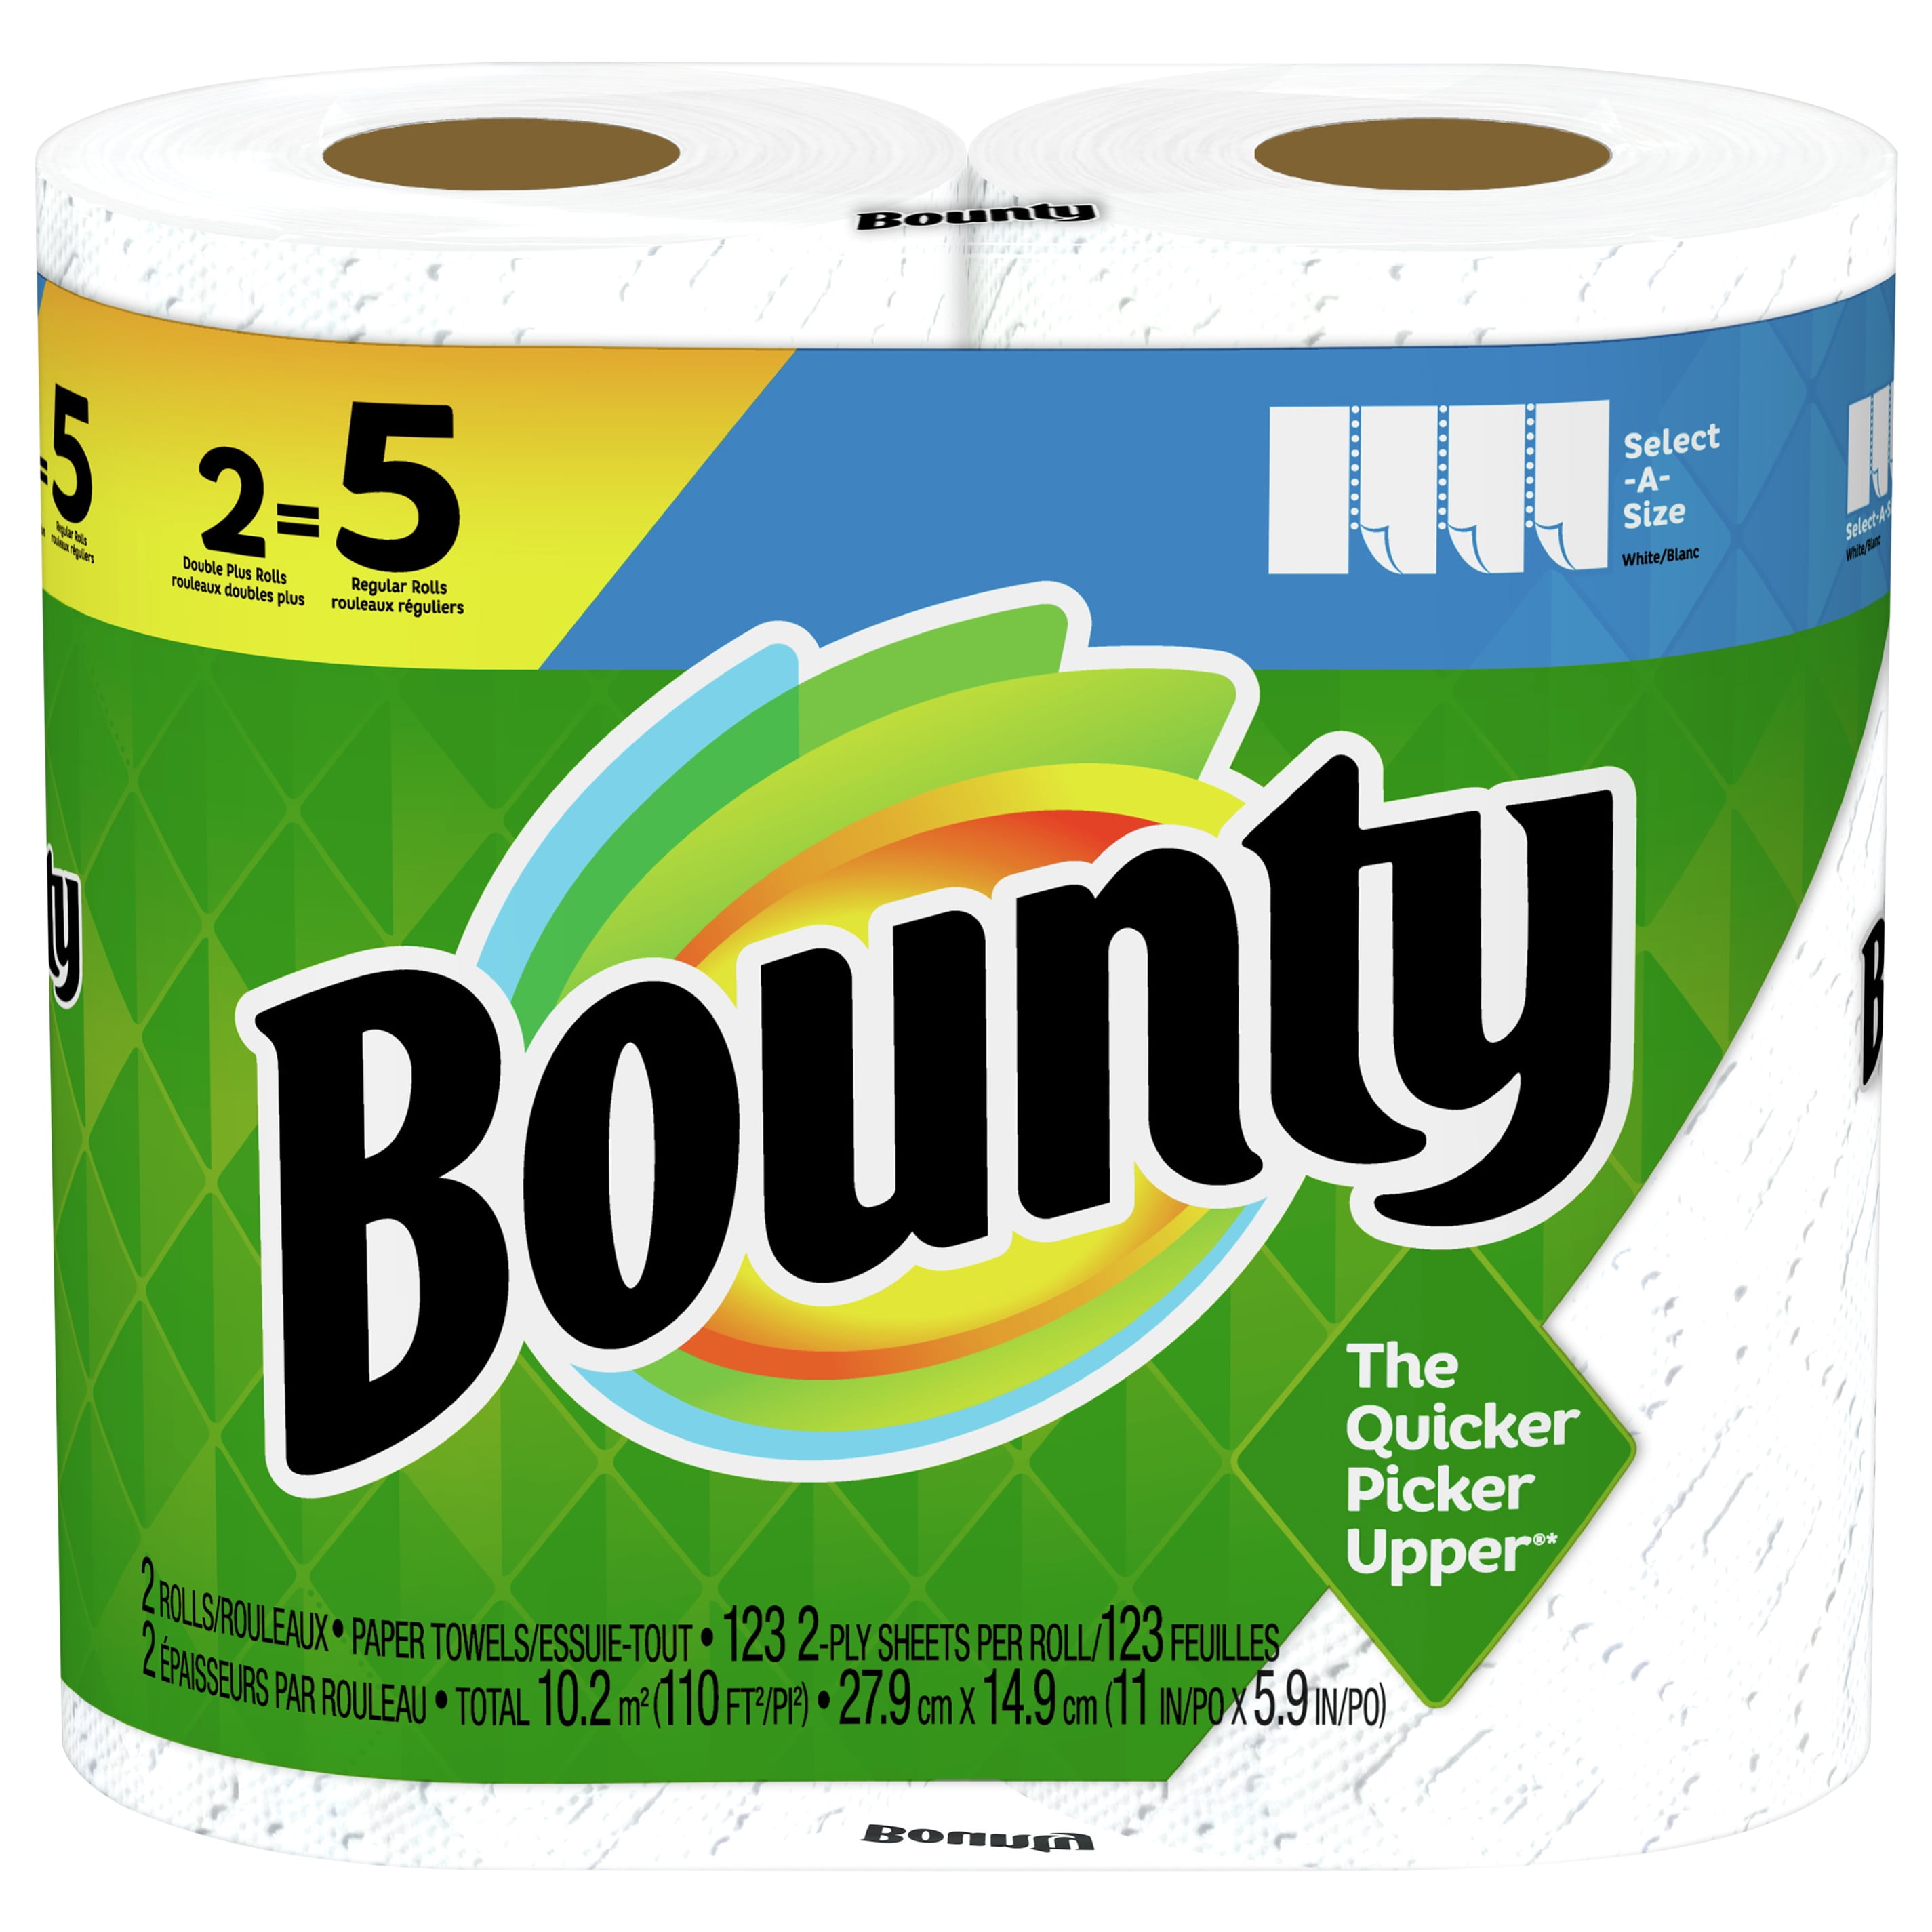 Bounty Double Plus Select-A-Size White Paper Towel Rolls, 2 rolls